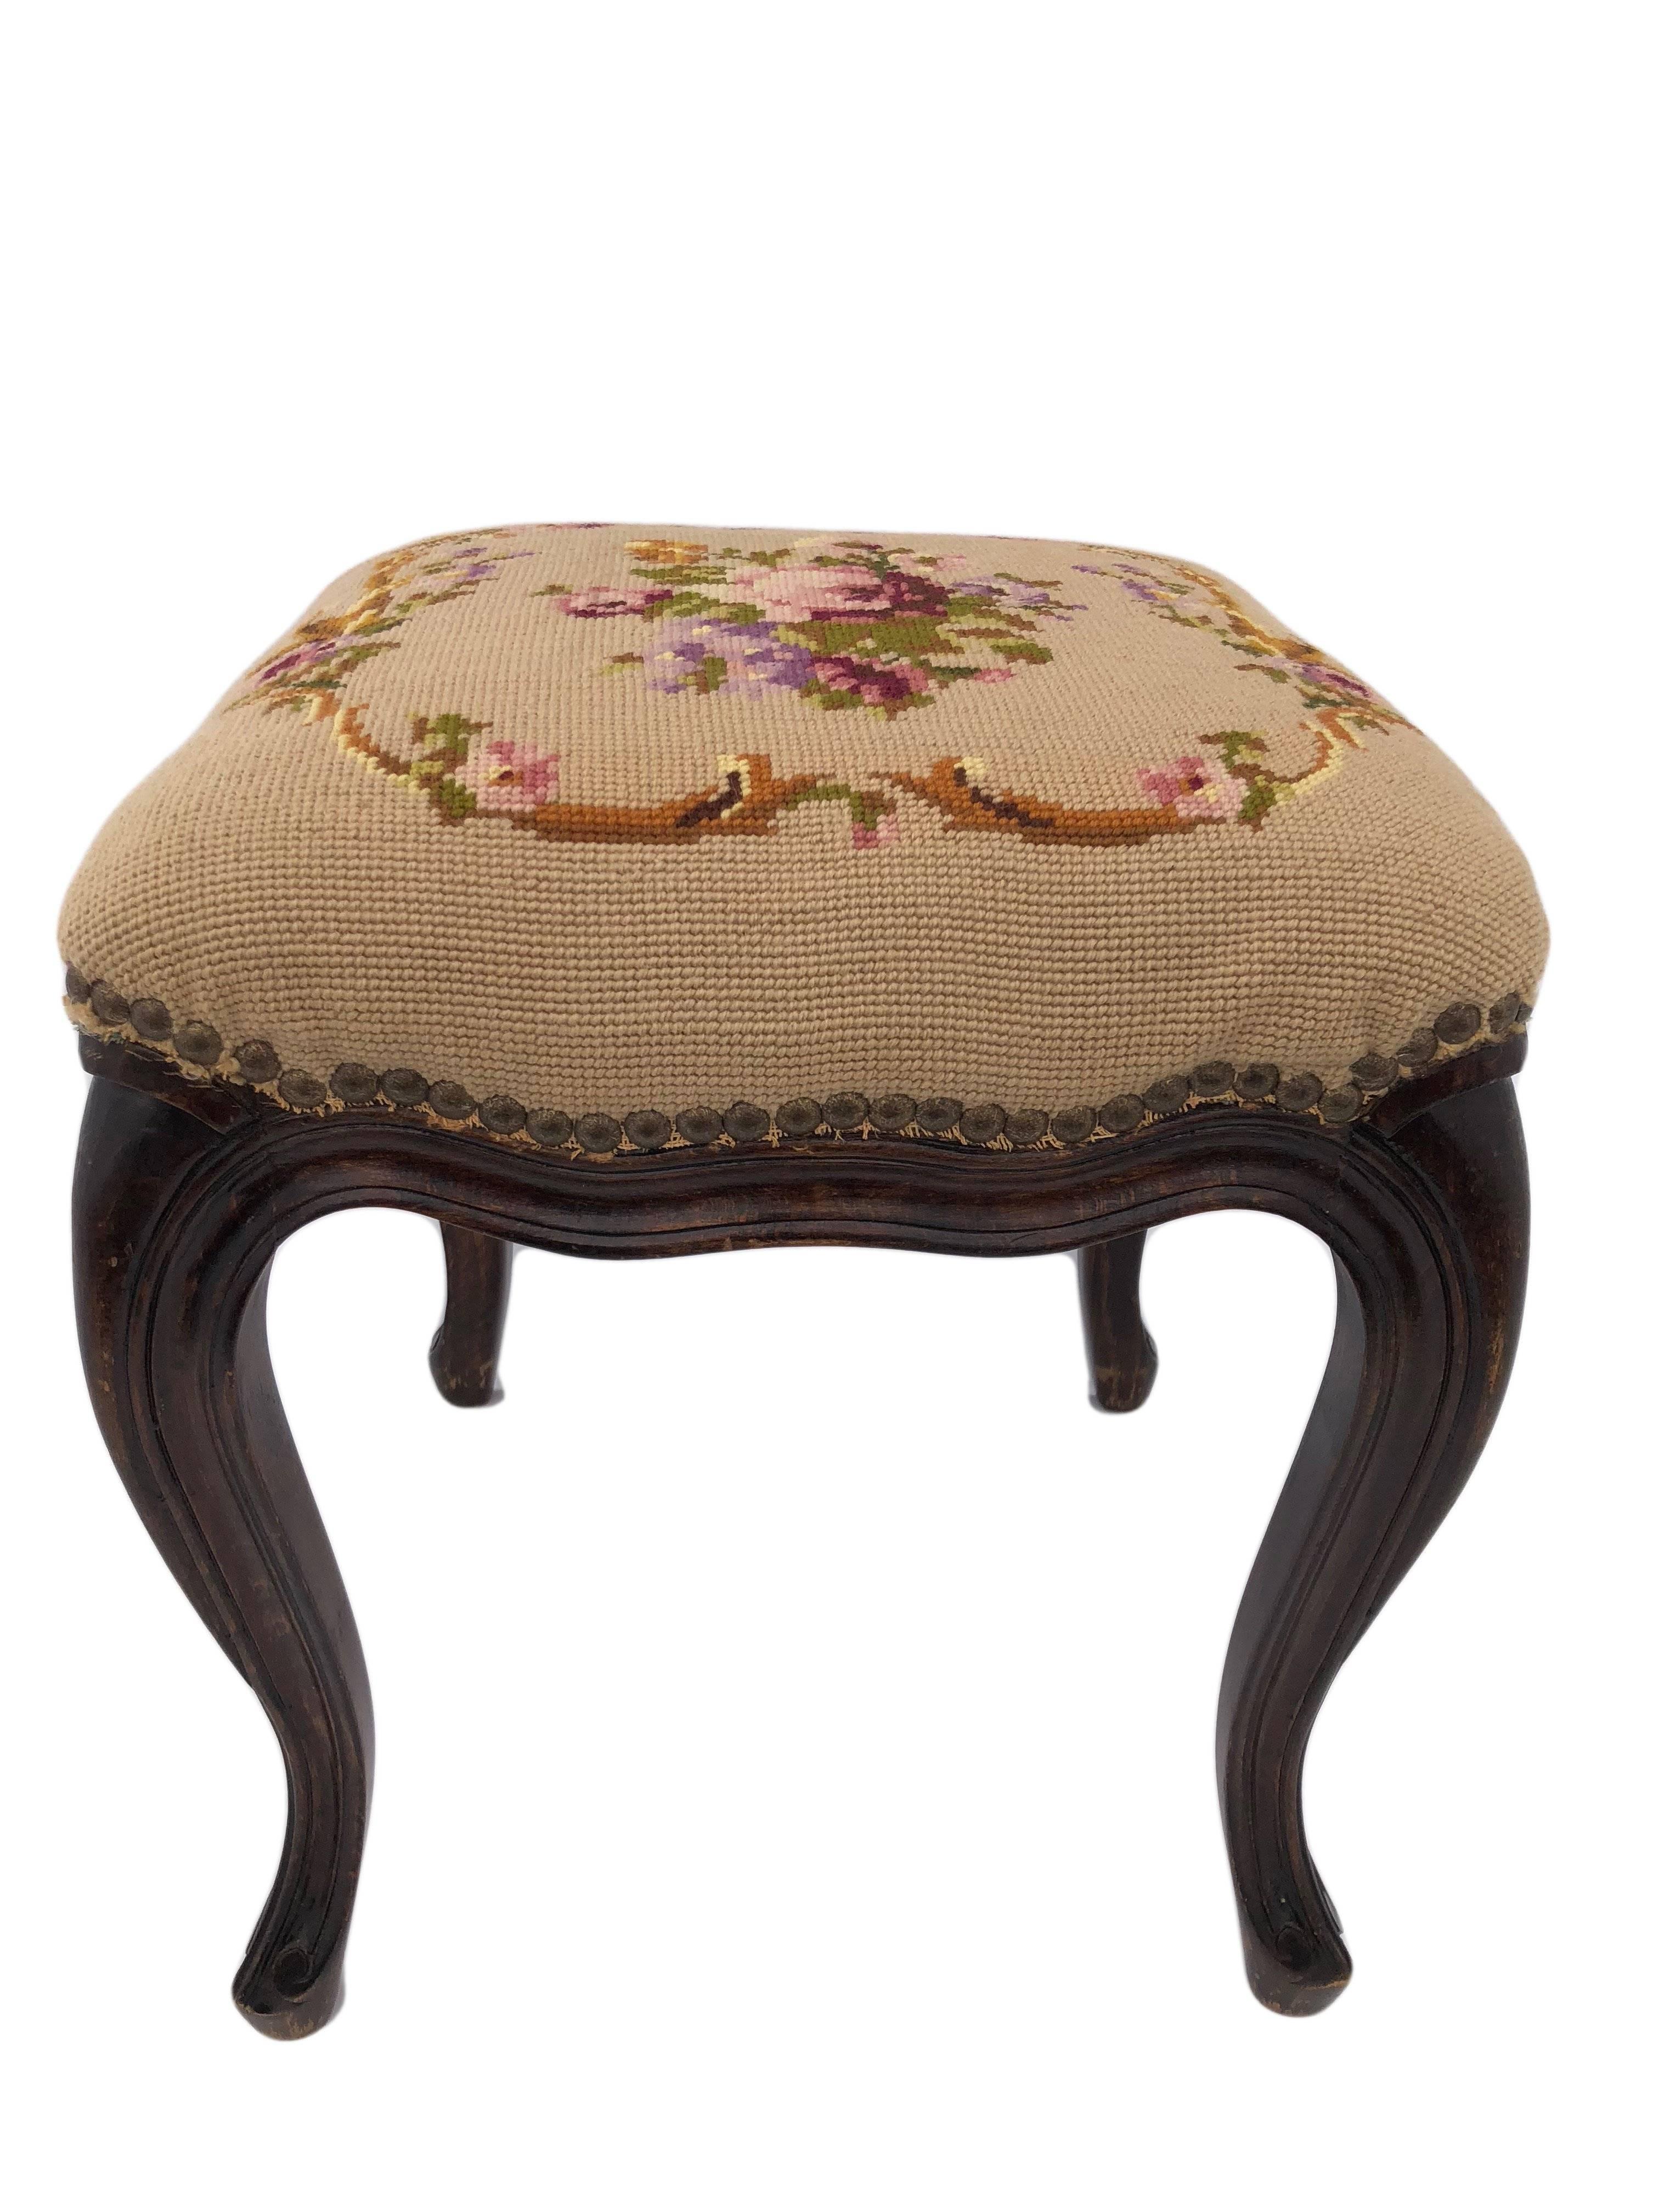 French Wooden Square Foot Stool with Floral Embroidery and Cream, Early 1900s In Good Condition In Petaluma, CA